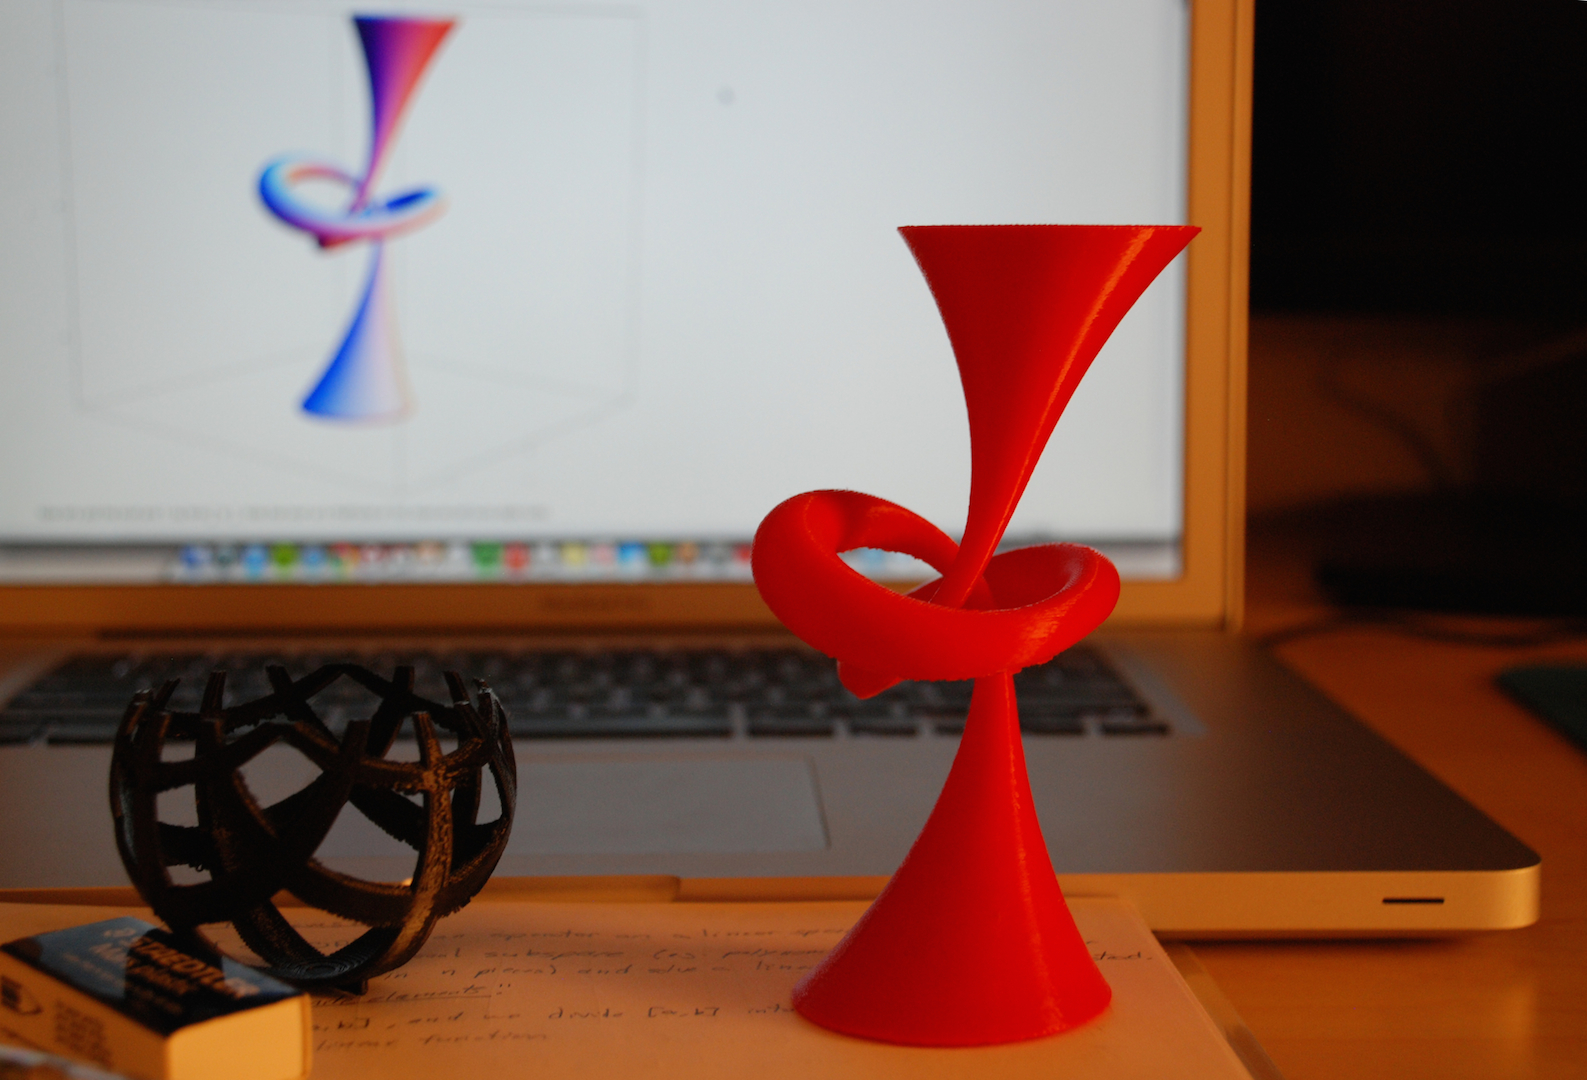 3D Printing the Trefoil Knot and its Pages.